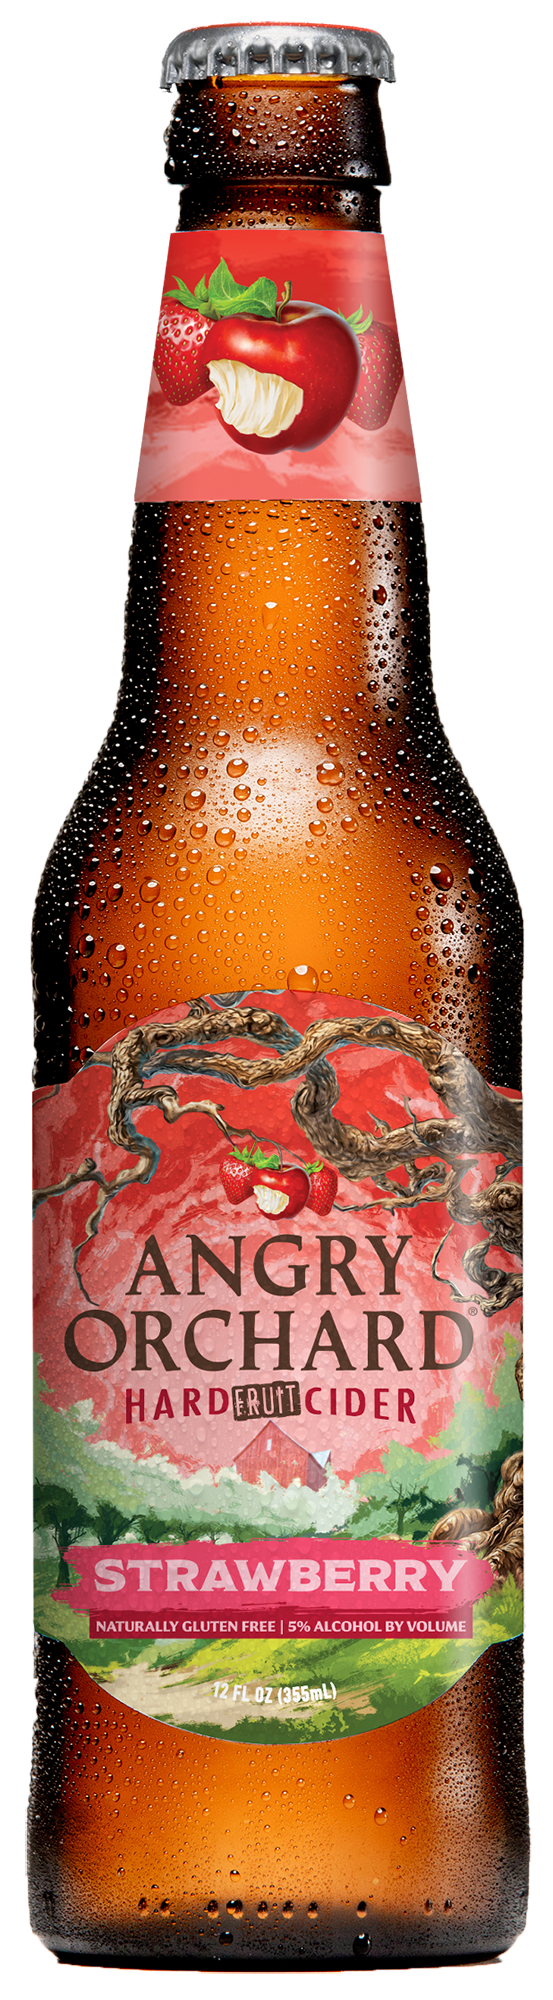 Angry Orchard Strawberry Hard Cider